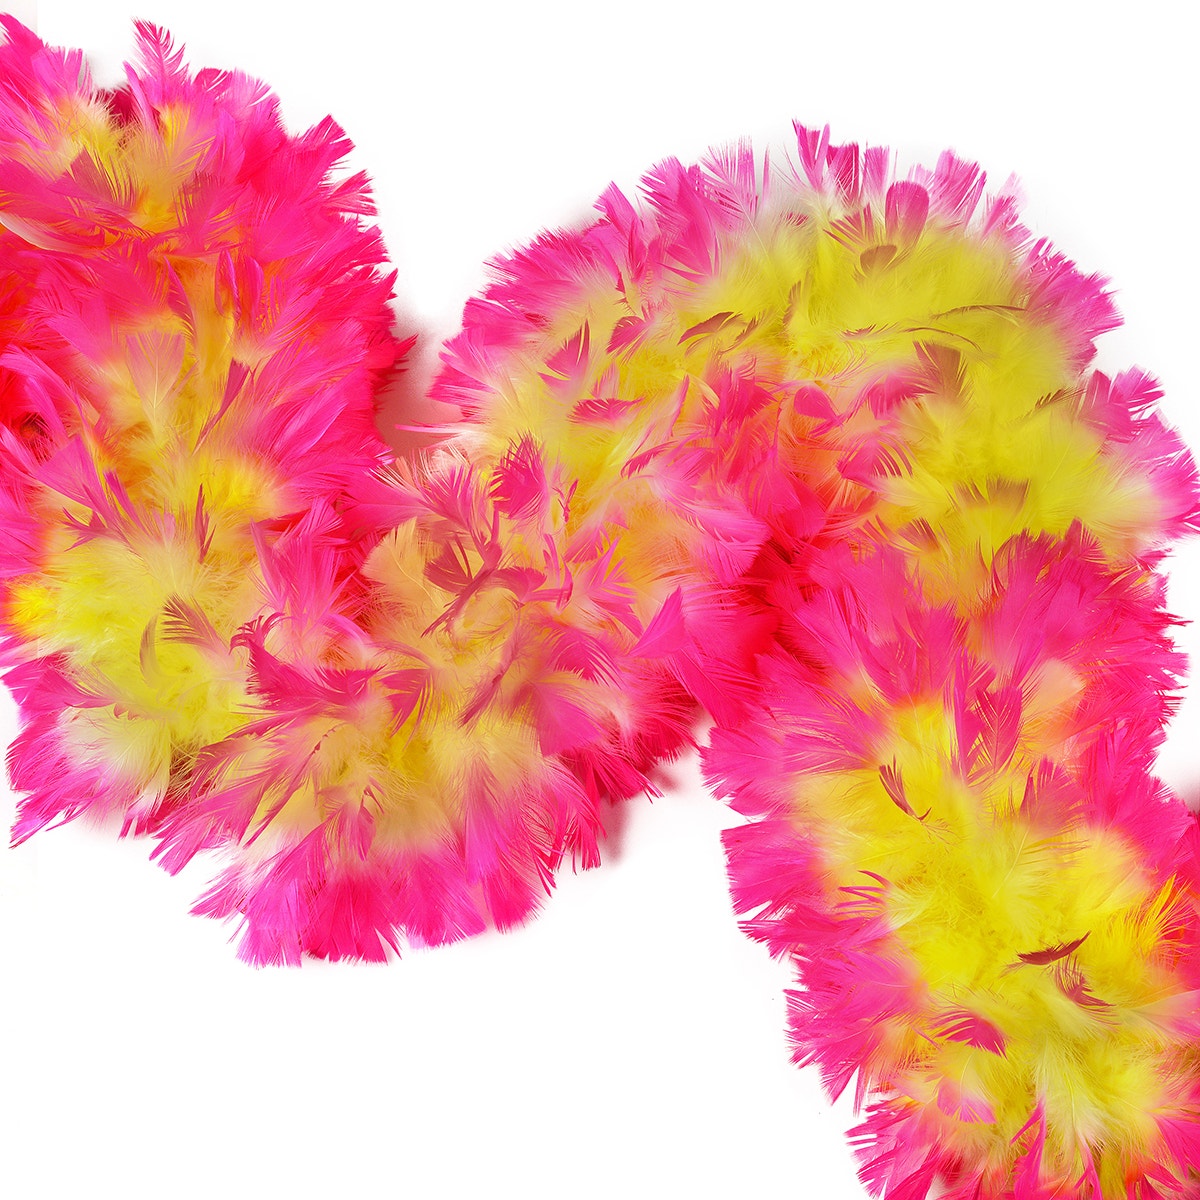 Turkey Feather Boa 10-14" - Fluorescent Yellow/Pink Orient Tipped